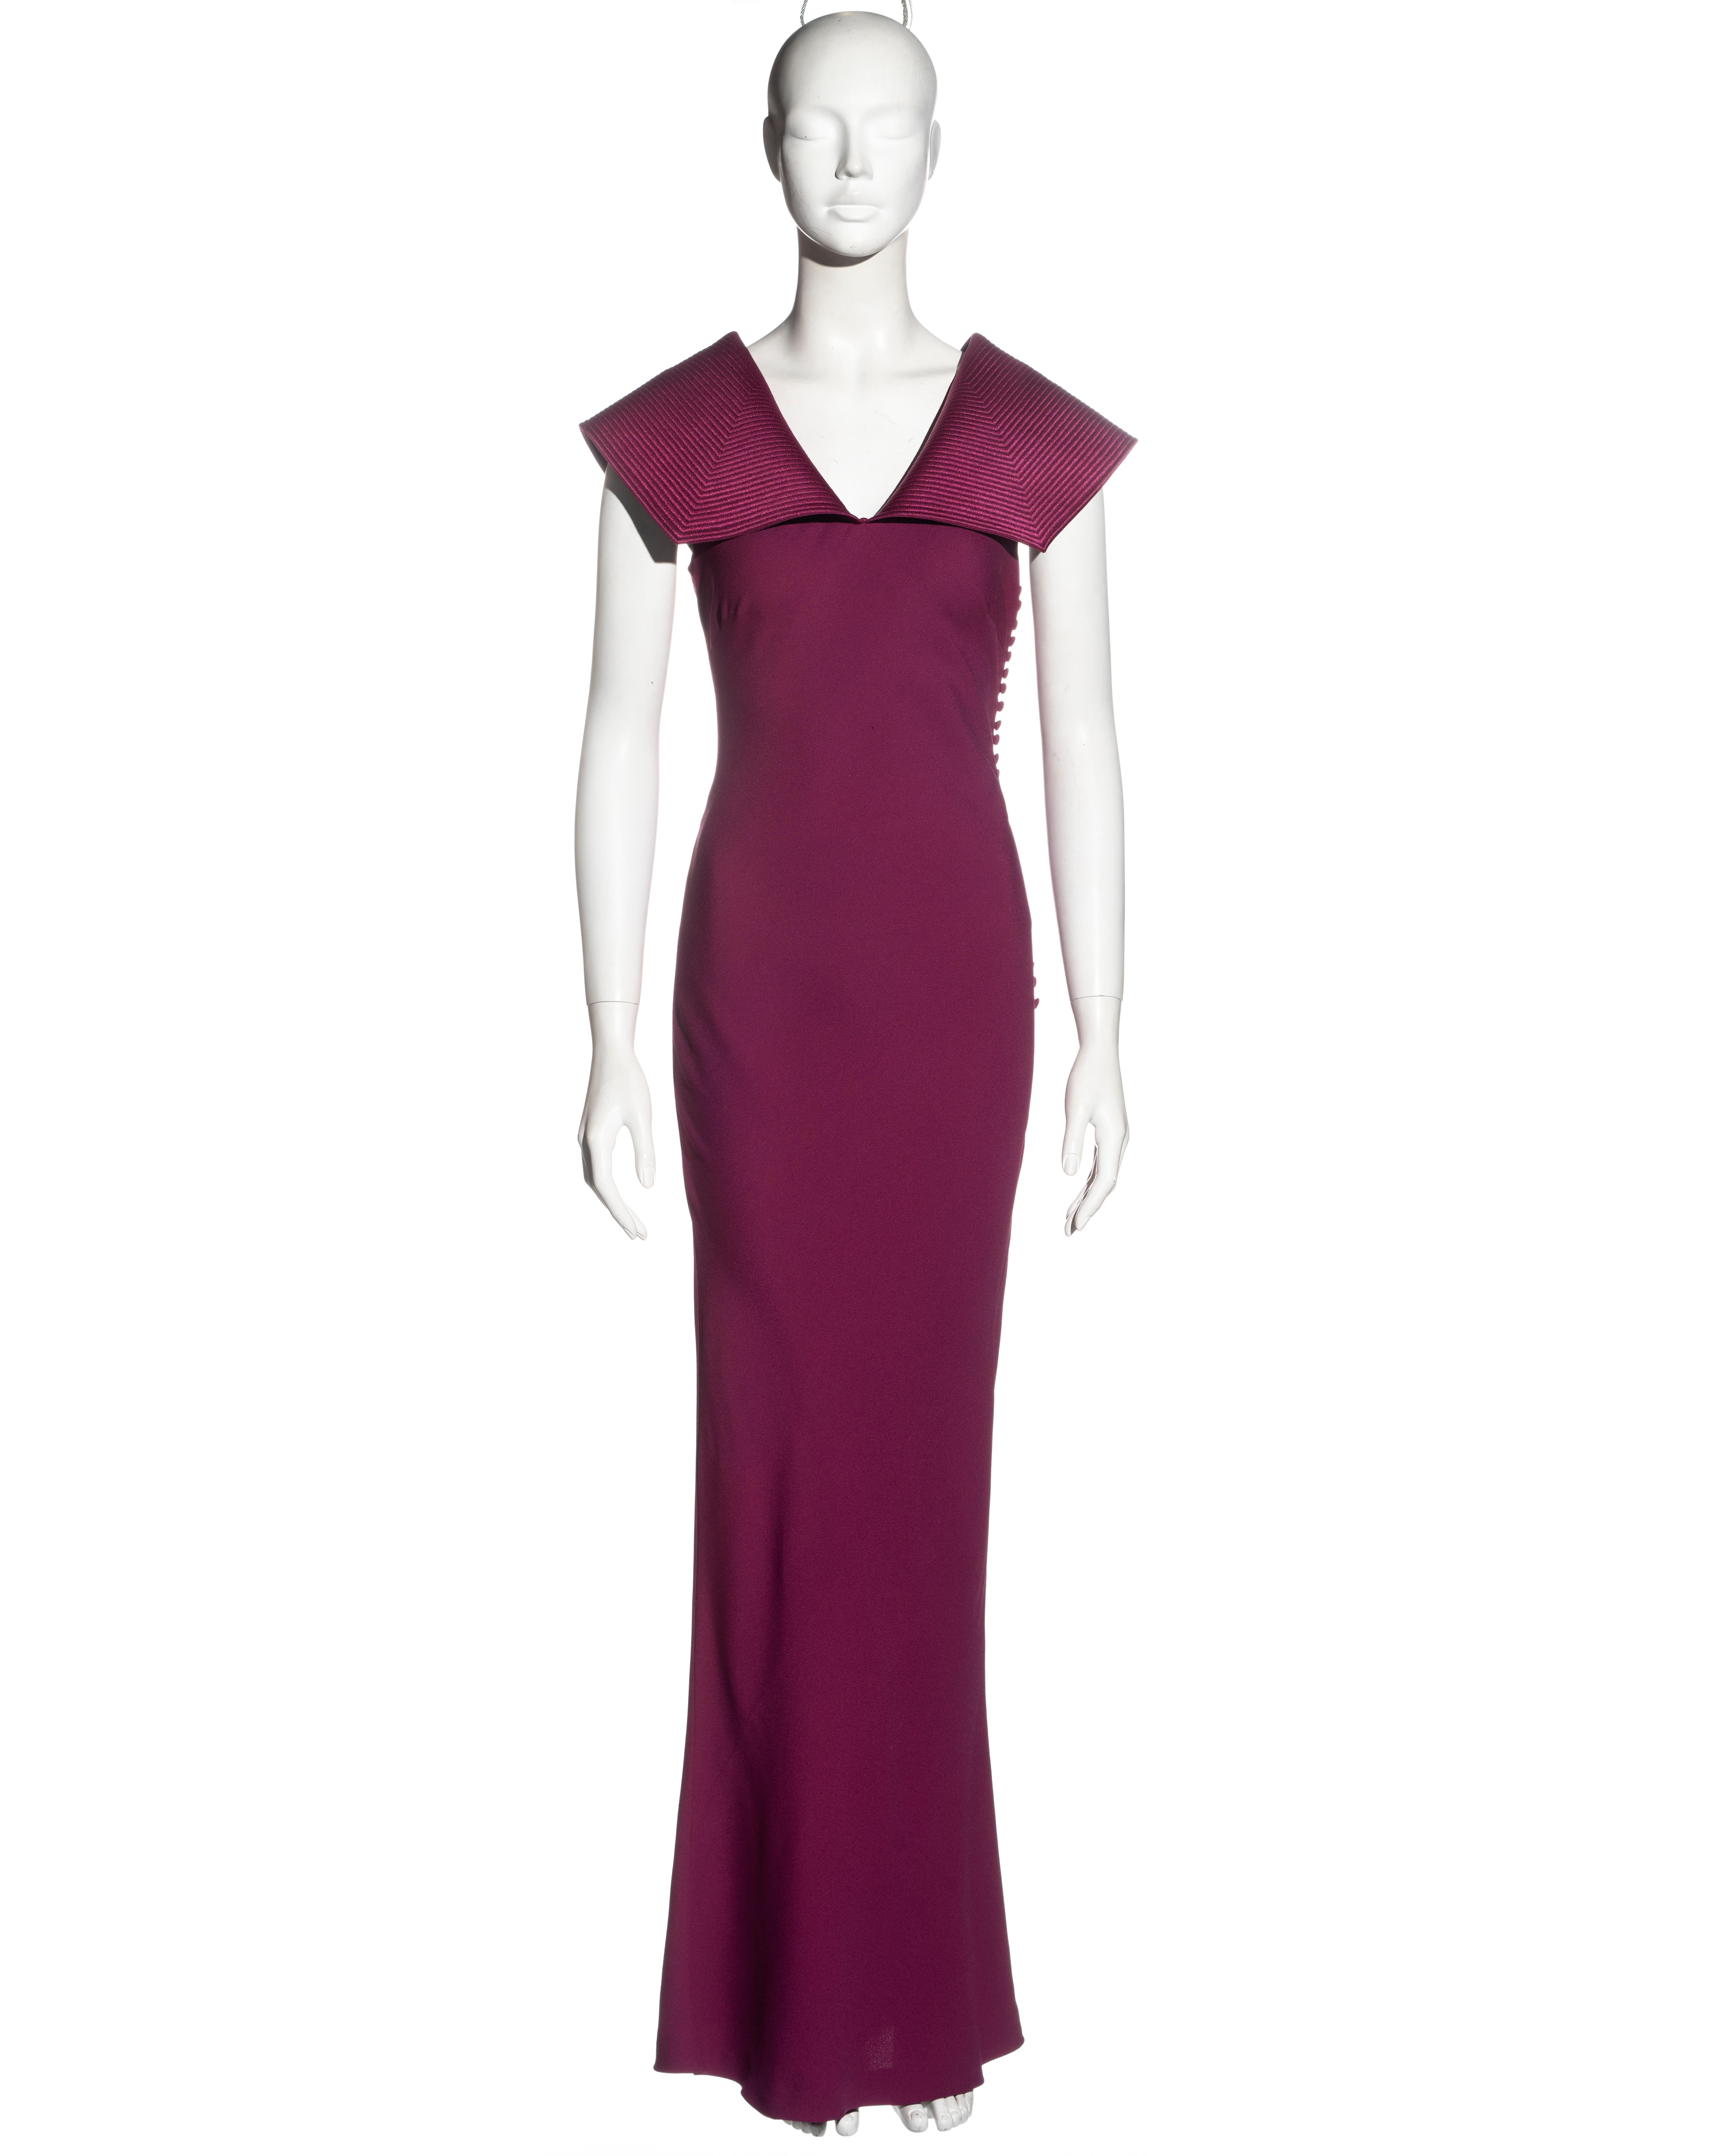 ▪ Christian Dior evening dress
▪ Designed by John Galliano
▪ Fuchsia crepe satin 
▪ Bias cut 
▪ Multiple fabric covered buttons at the side opening 
▪ Wide collar extending over the shoulders with multiple parallel stitches 
▪ FR 40 - UK 12 - US 8
▪